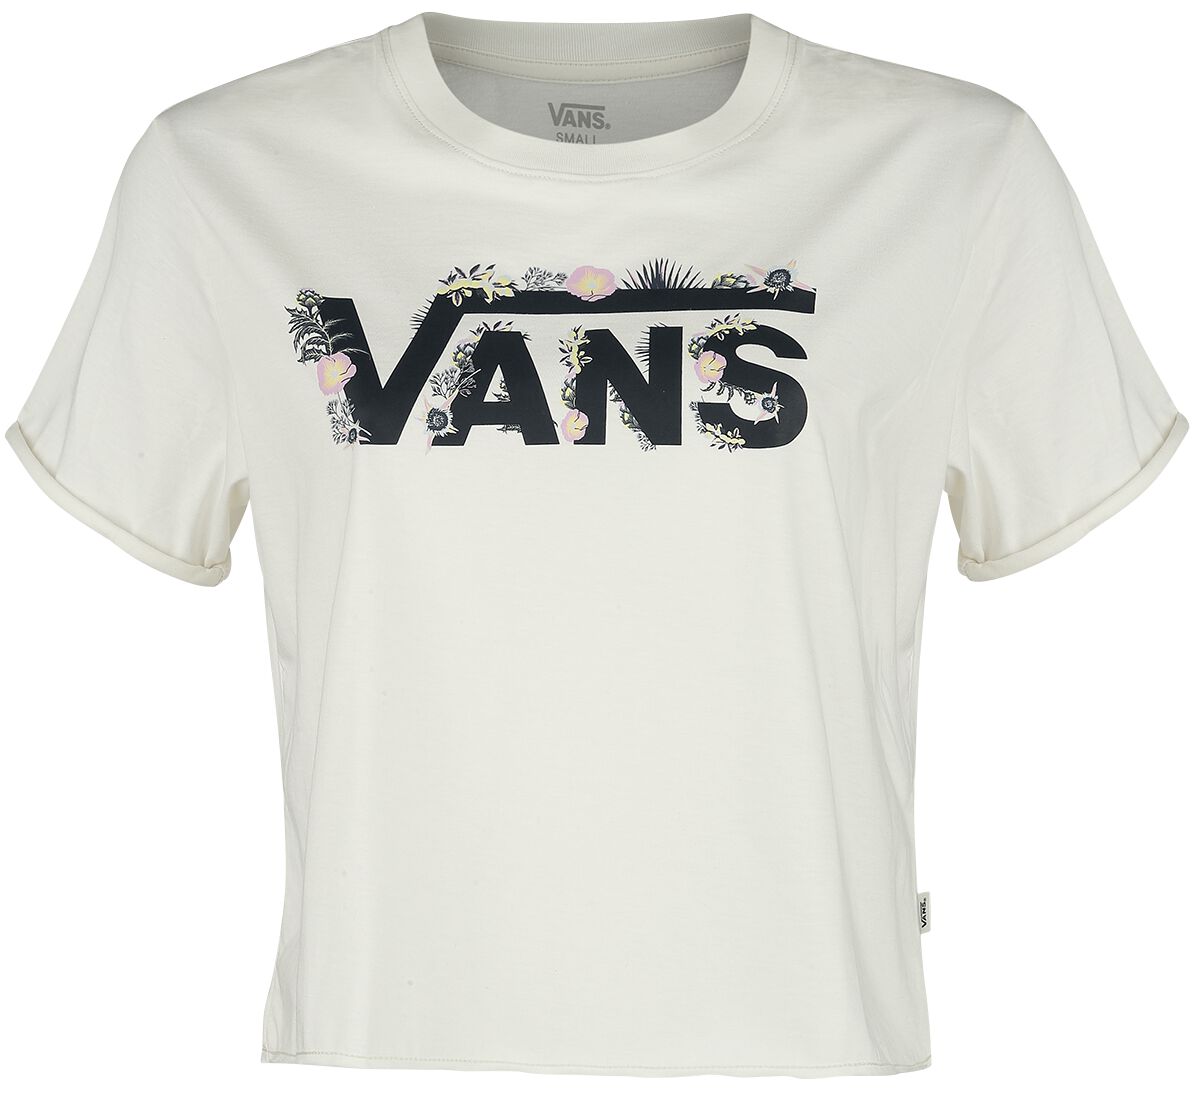 Vans Blozzom Roll Out T-Shirt off white